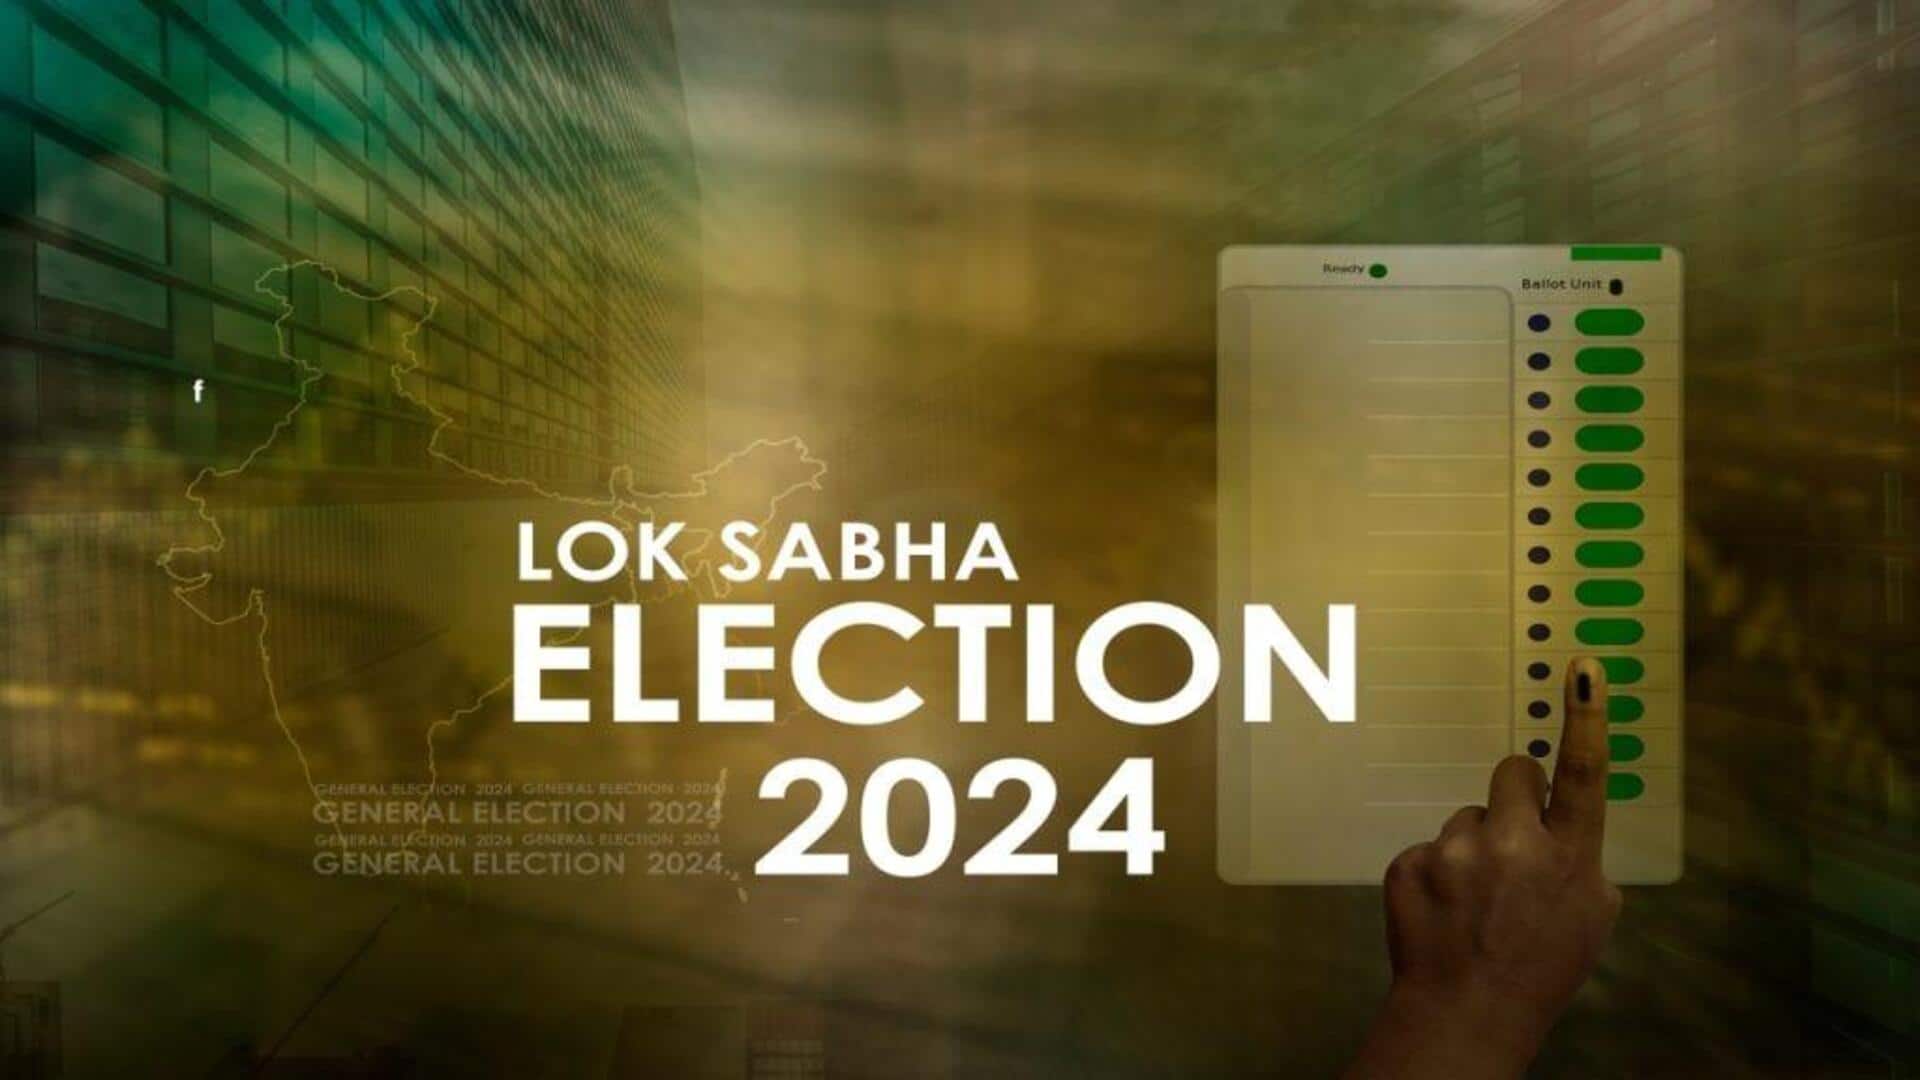 Lok Sabha election 2024: How to locate polling booth online?